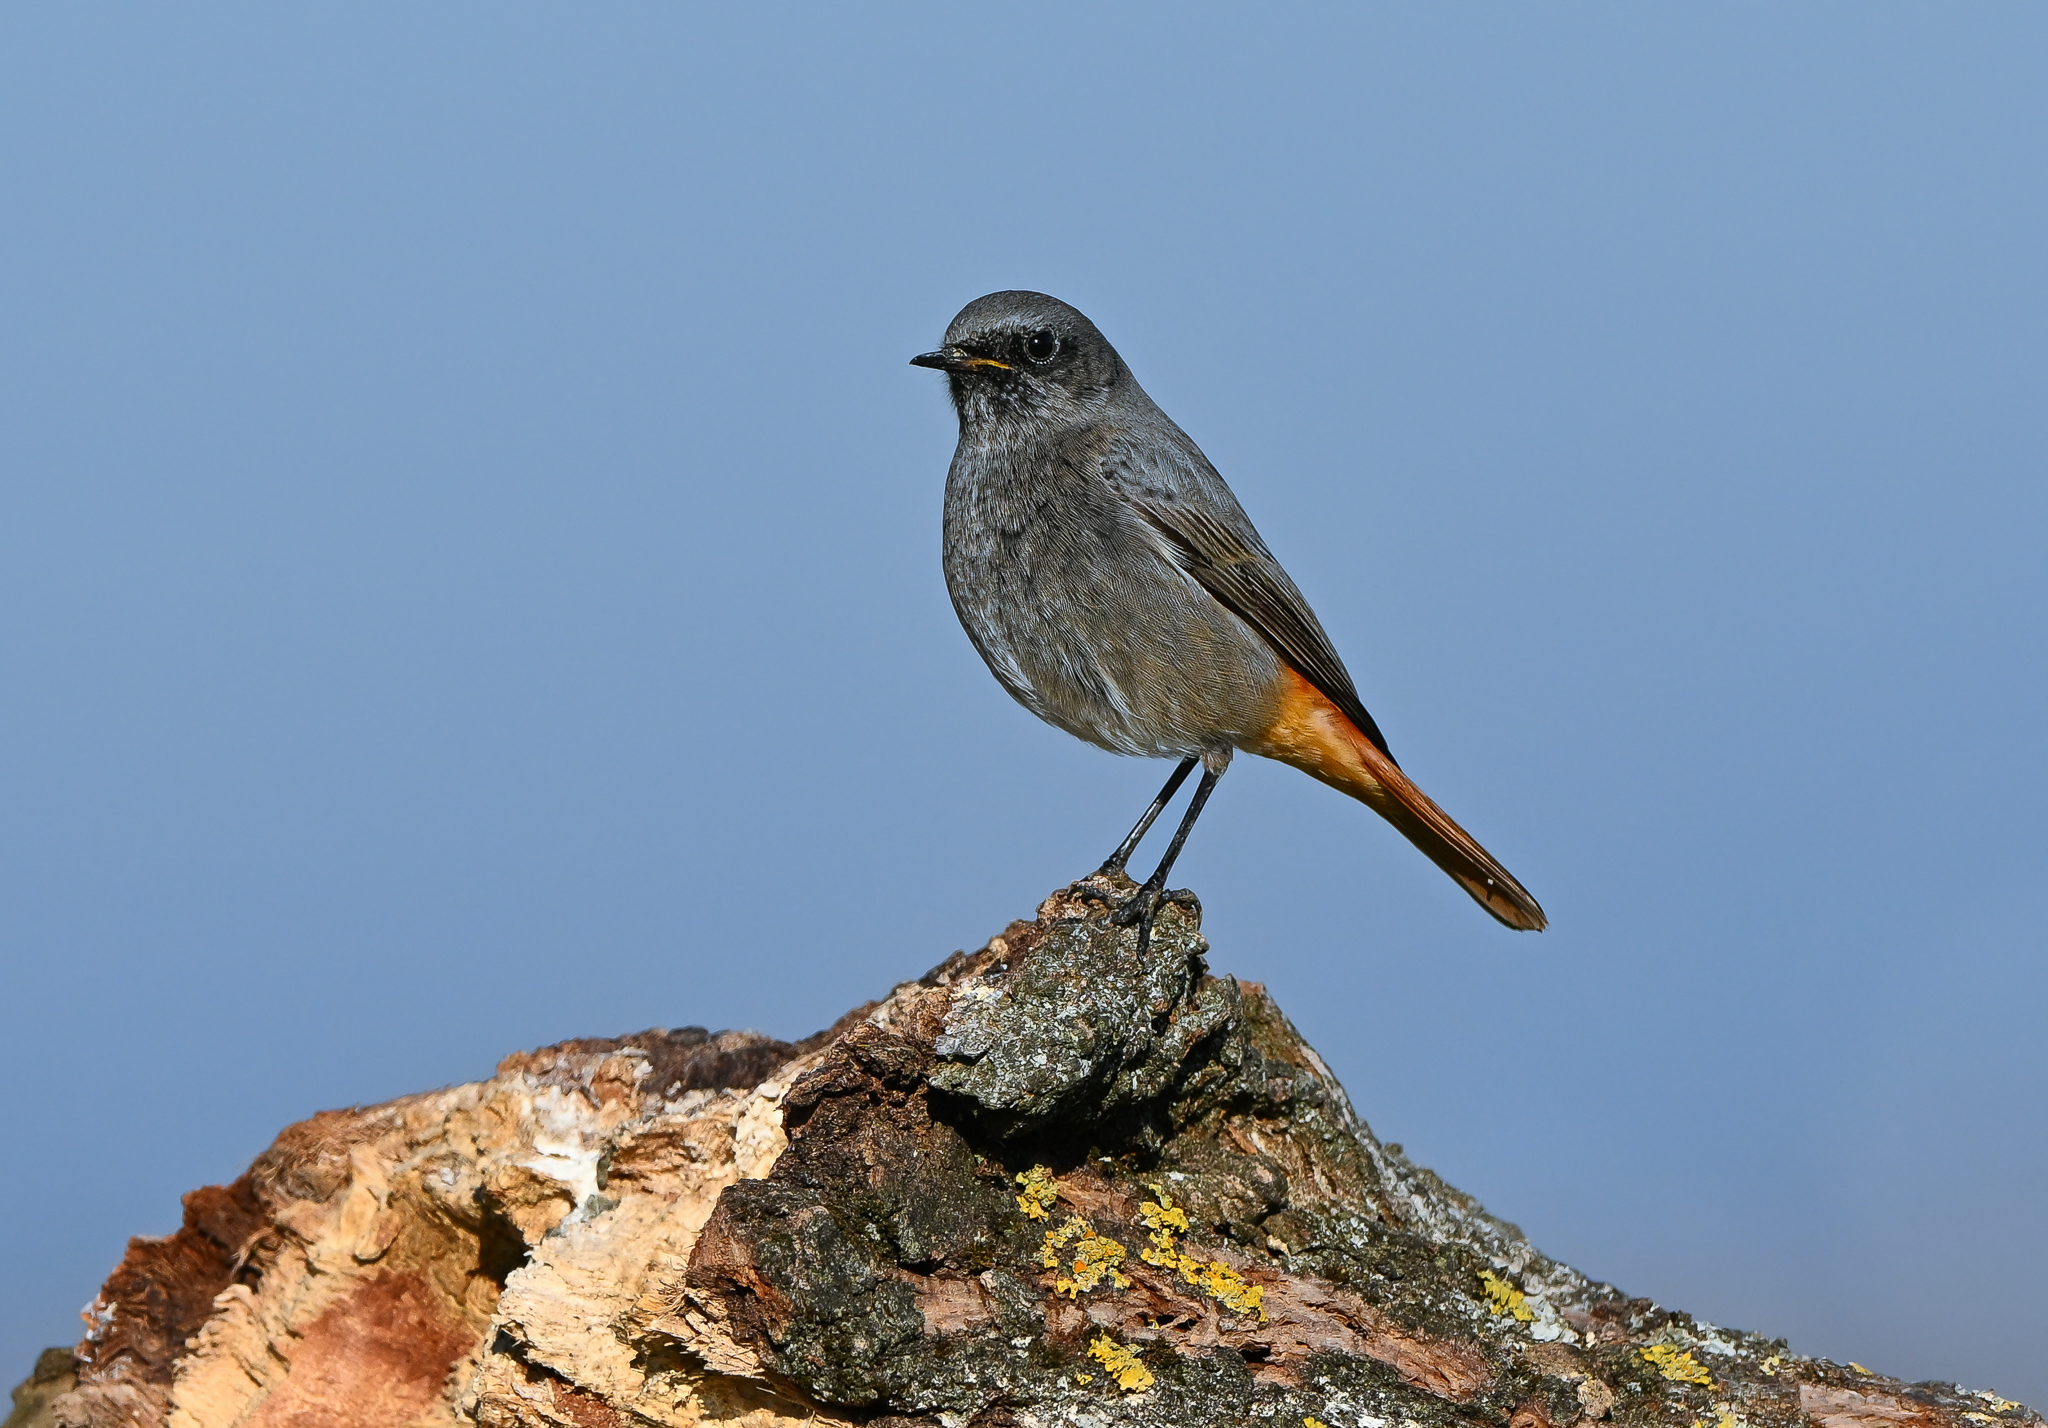 Redstart, chimney sweep, solitary and territorial....